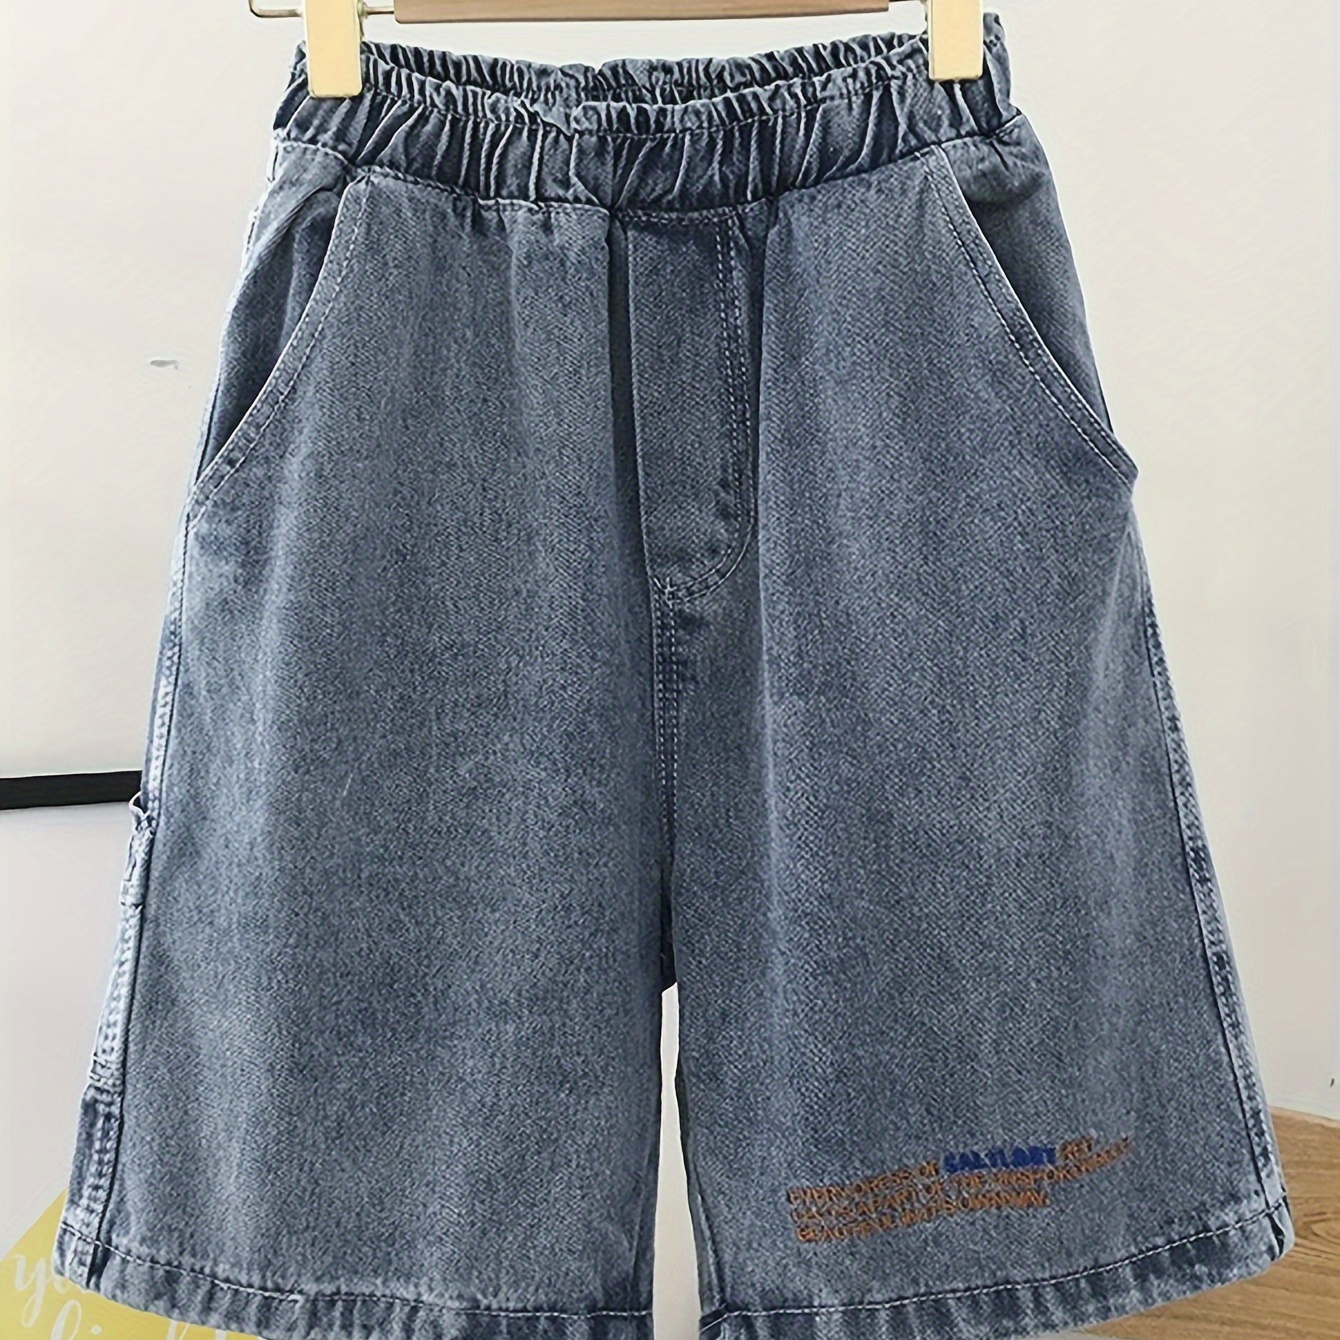 

Women's Plus Size Bermuda High Waisted Denim Shorts For Summer With Pockets, Elastic Waist Loose Wide-leg Jean Shorts For Women, Casual Blue Color Comfy Denim Bottoms, Women's Clothing